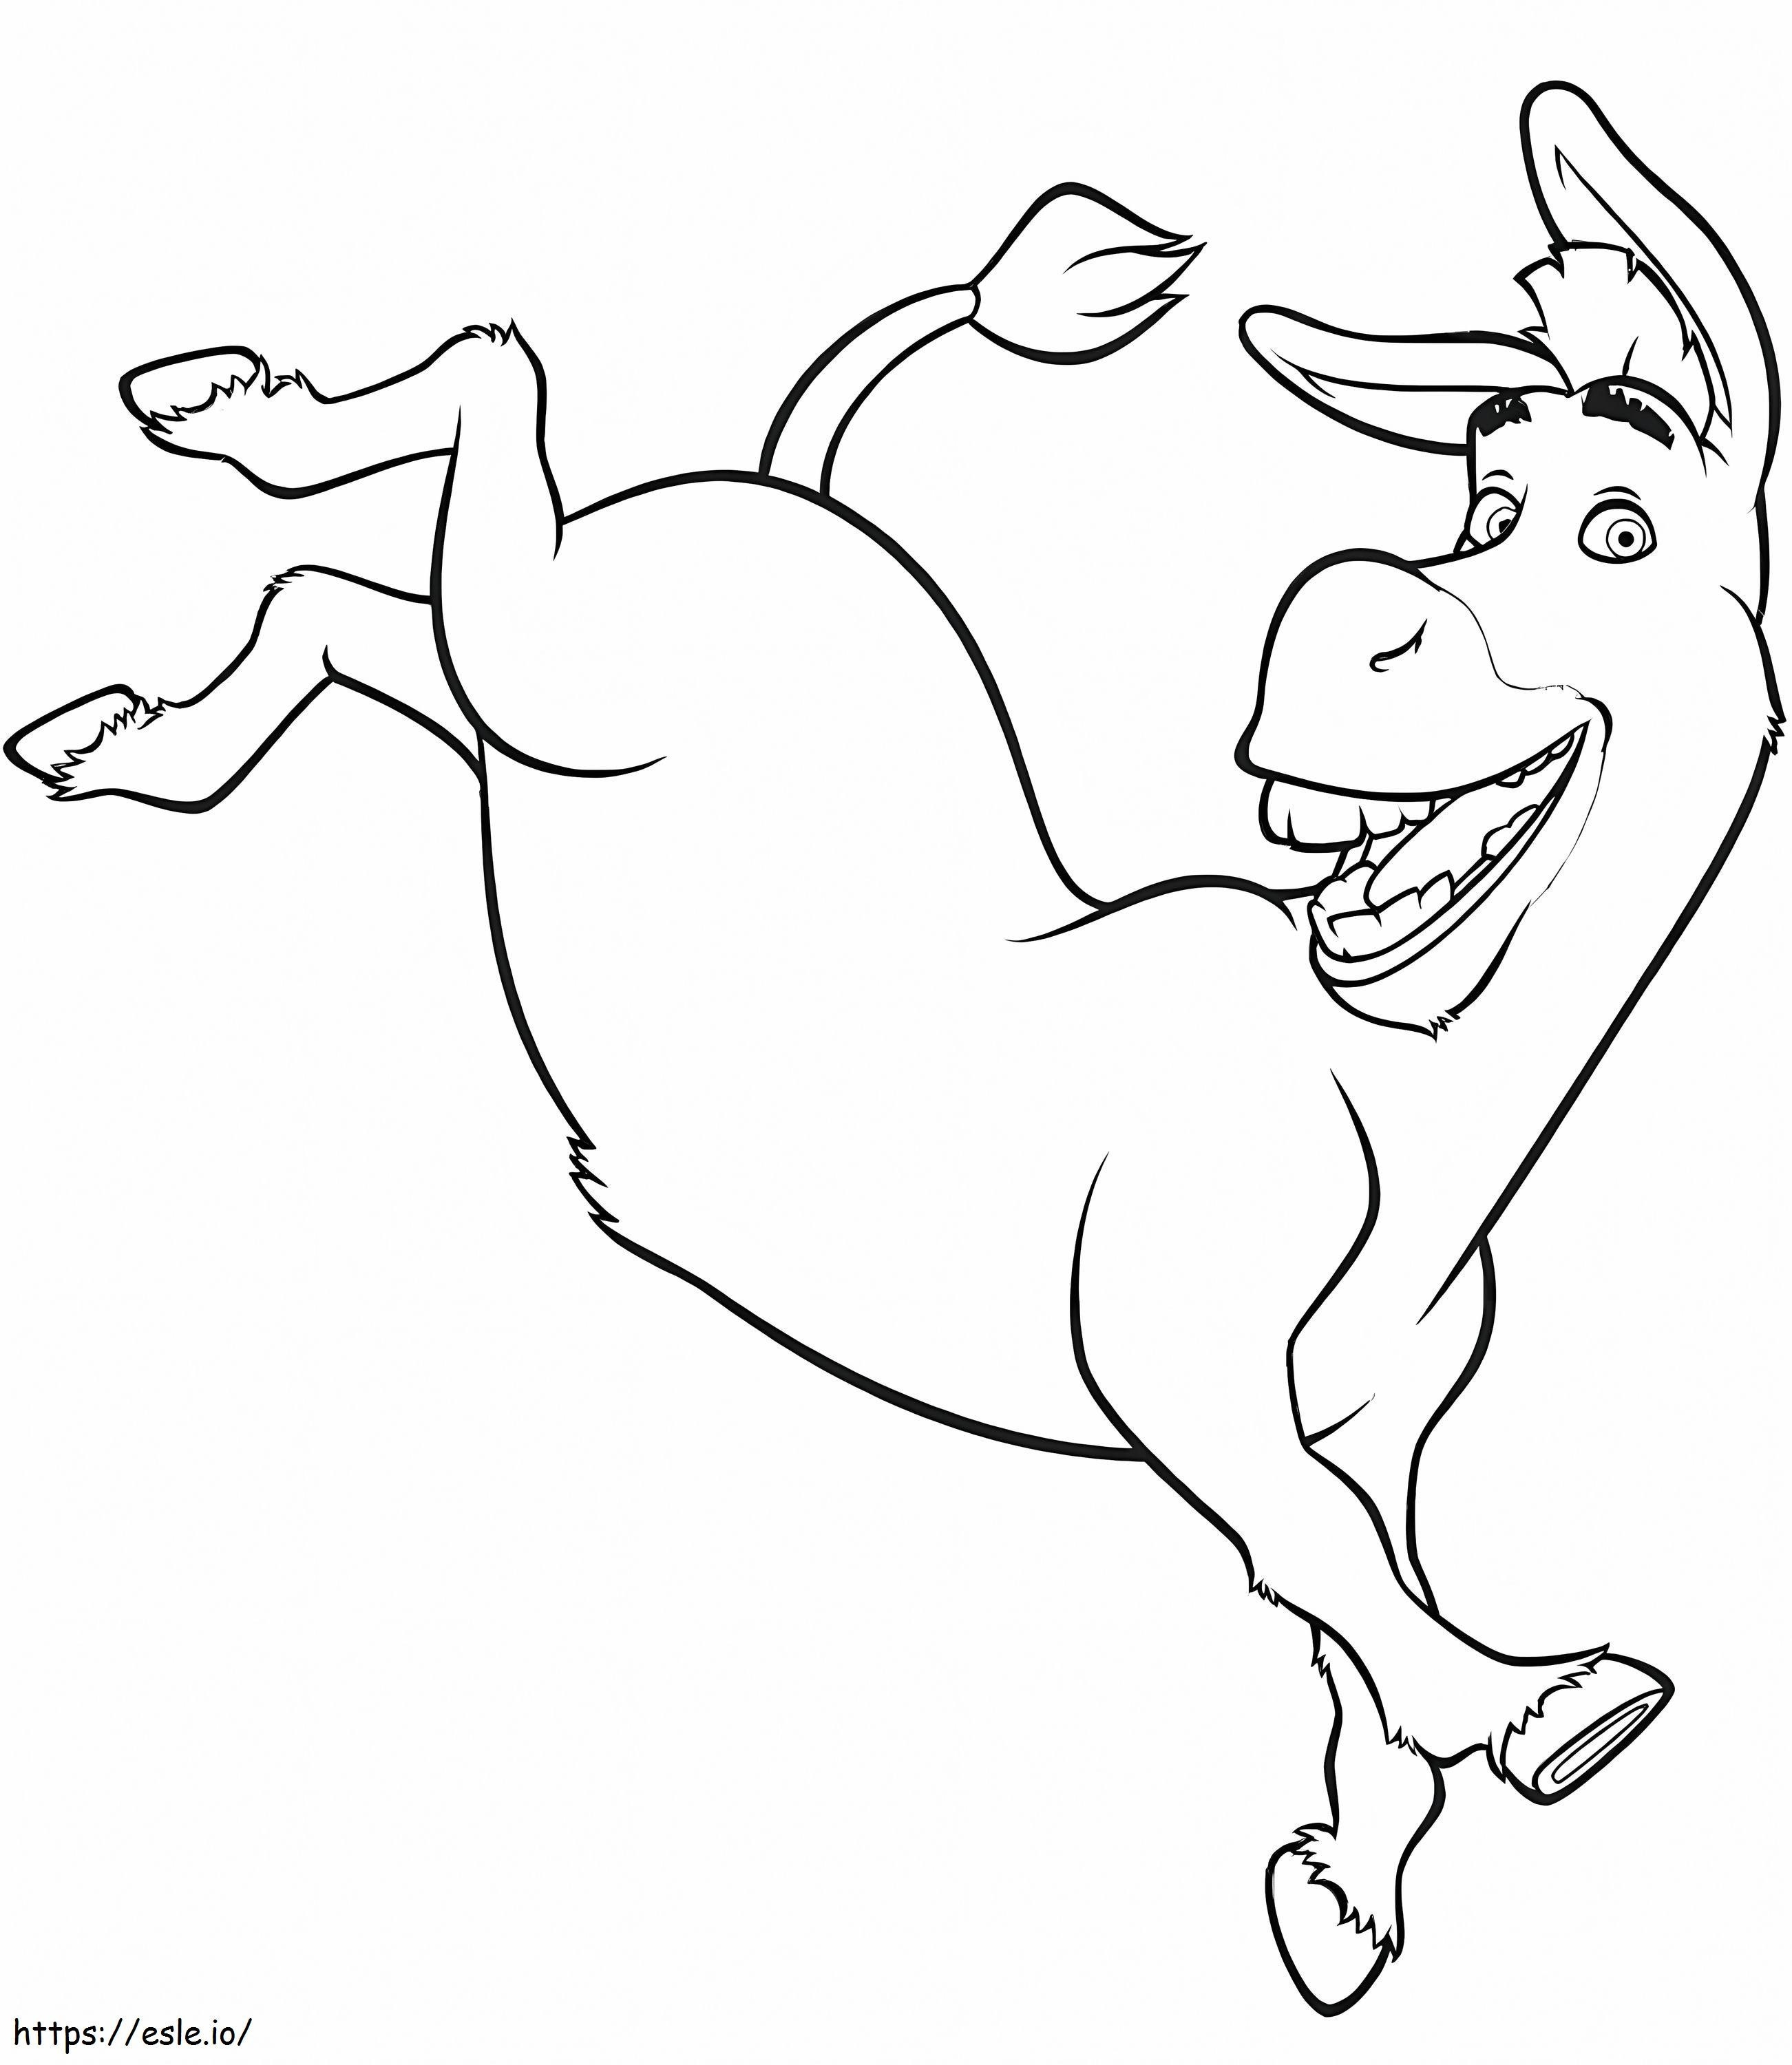 Funny Cartoon Donkey coloring page